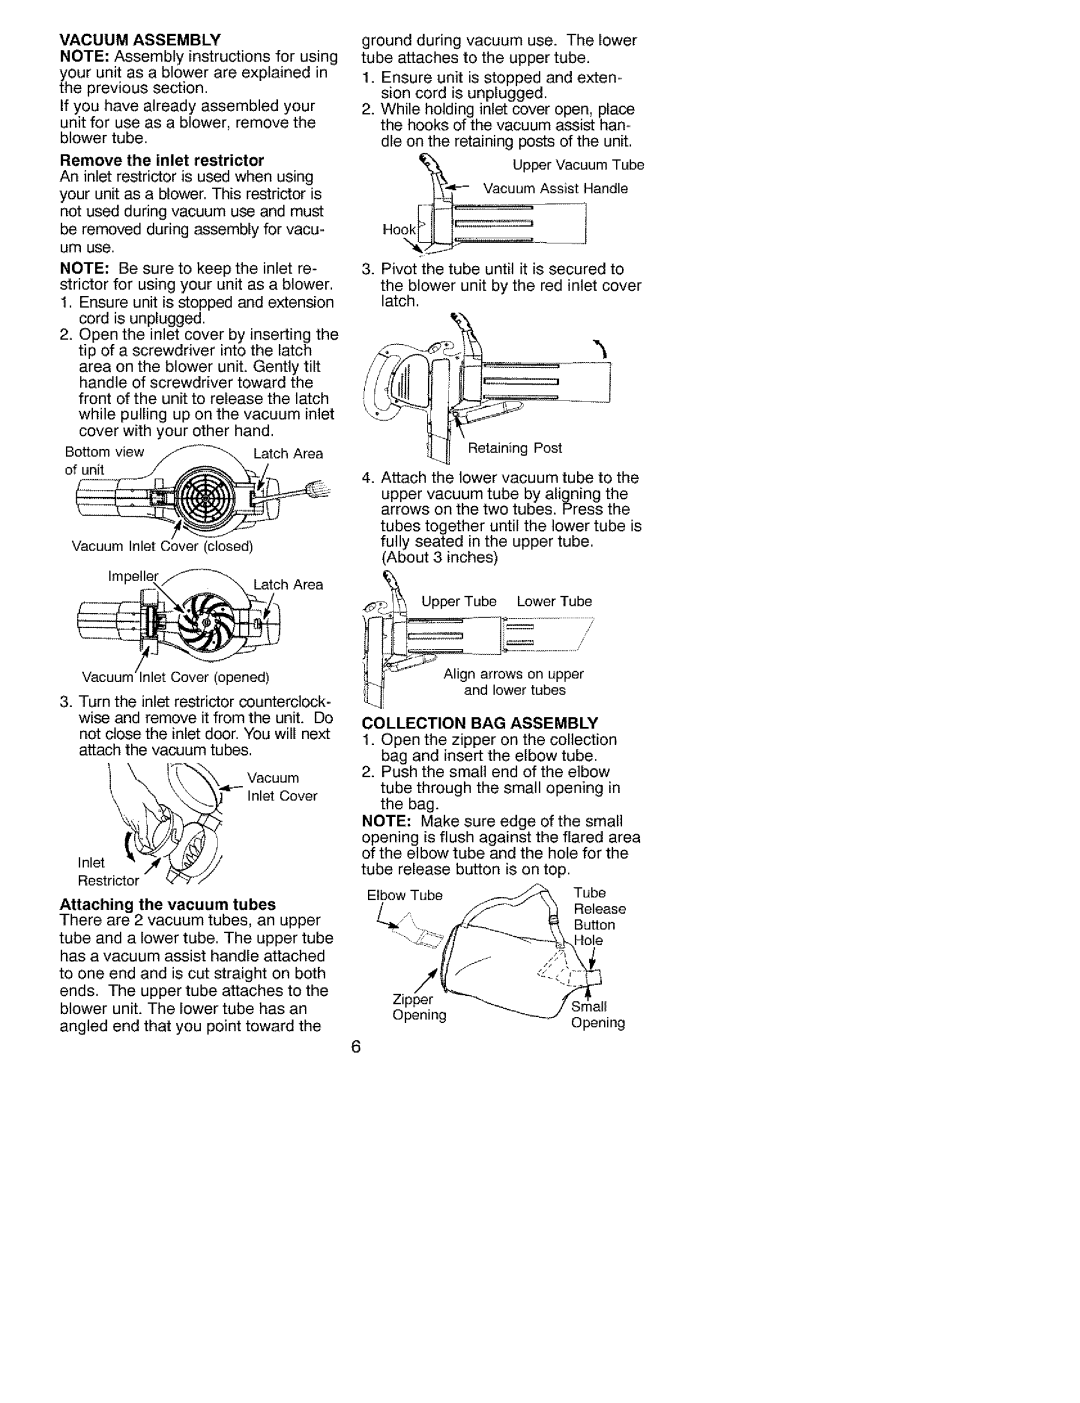 Craftsman 79939 manual Vacuum Assembly, Remove the inlet restrictor, Attaching the vacuum tubes, L.- J 